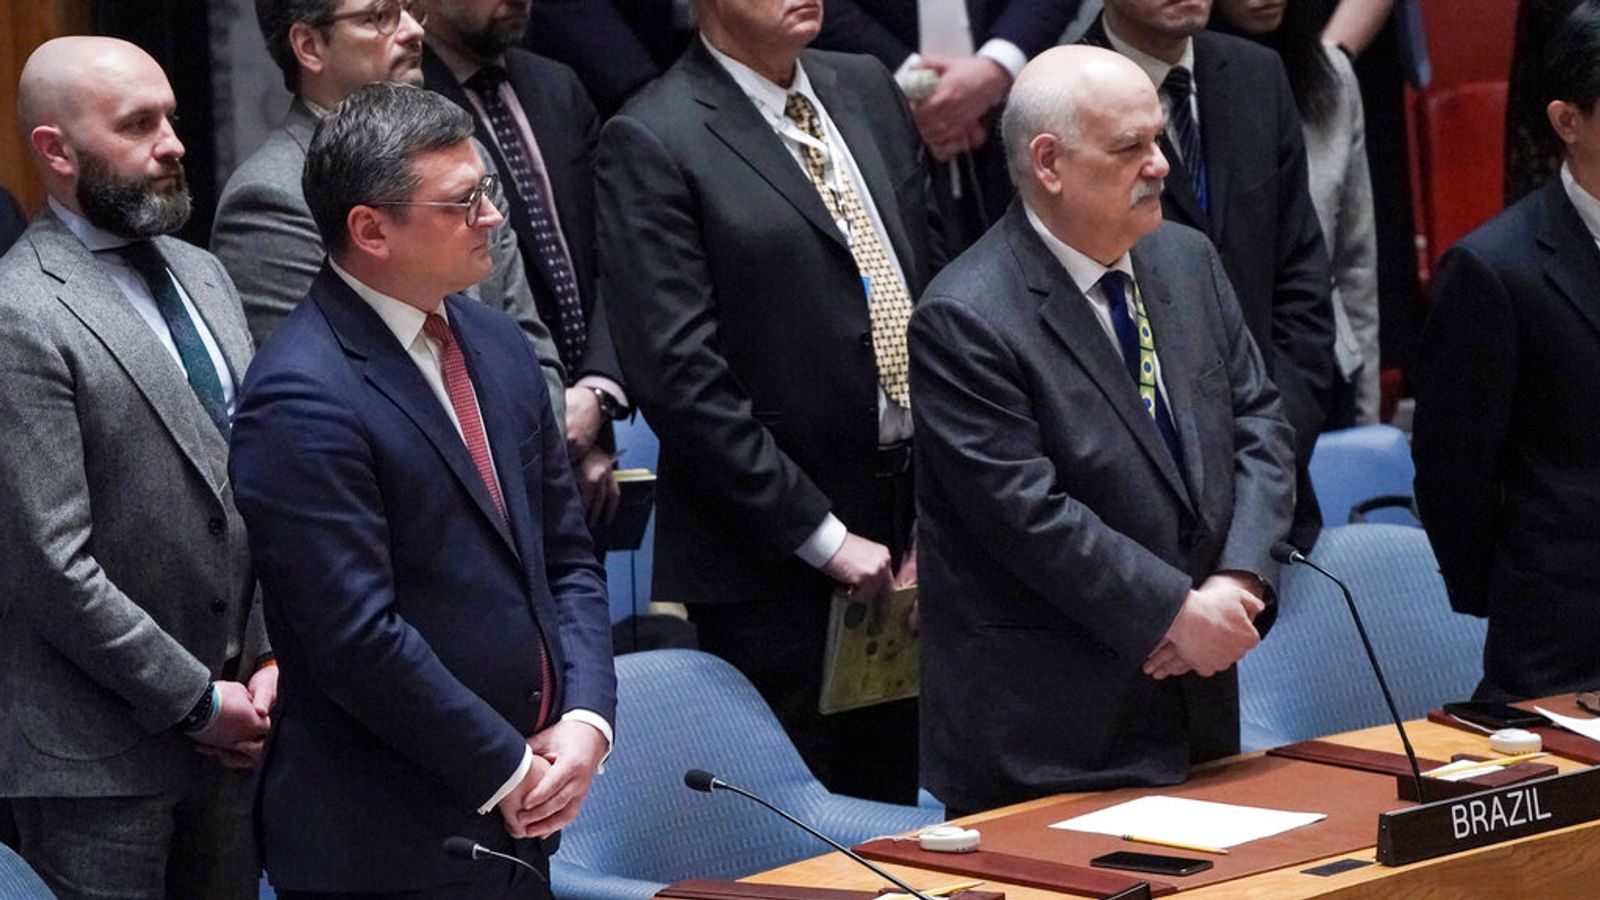 Russian ambassador interrupts minute's silence for Ukraine and says 'all lives are priceless'